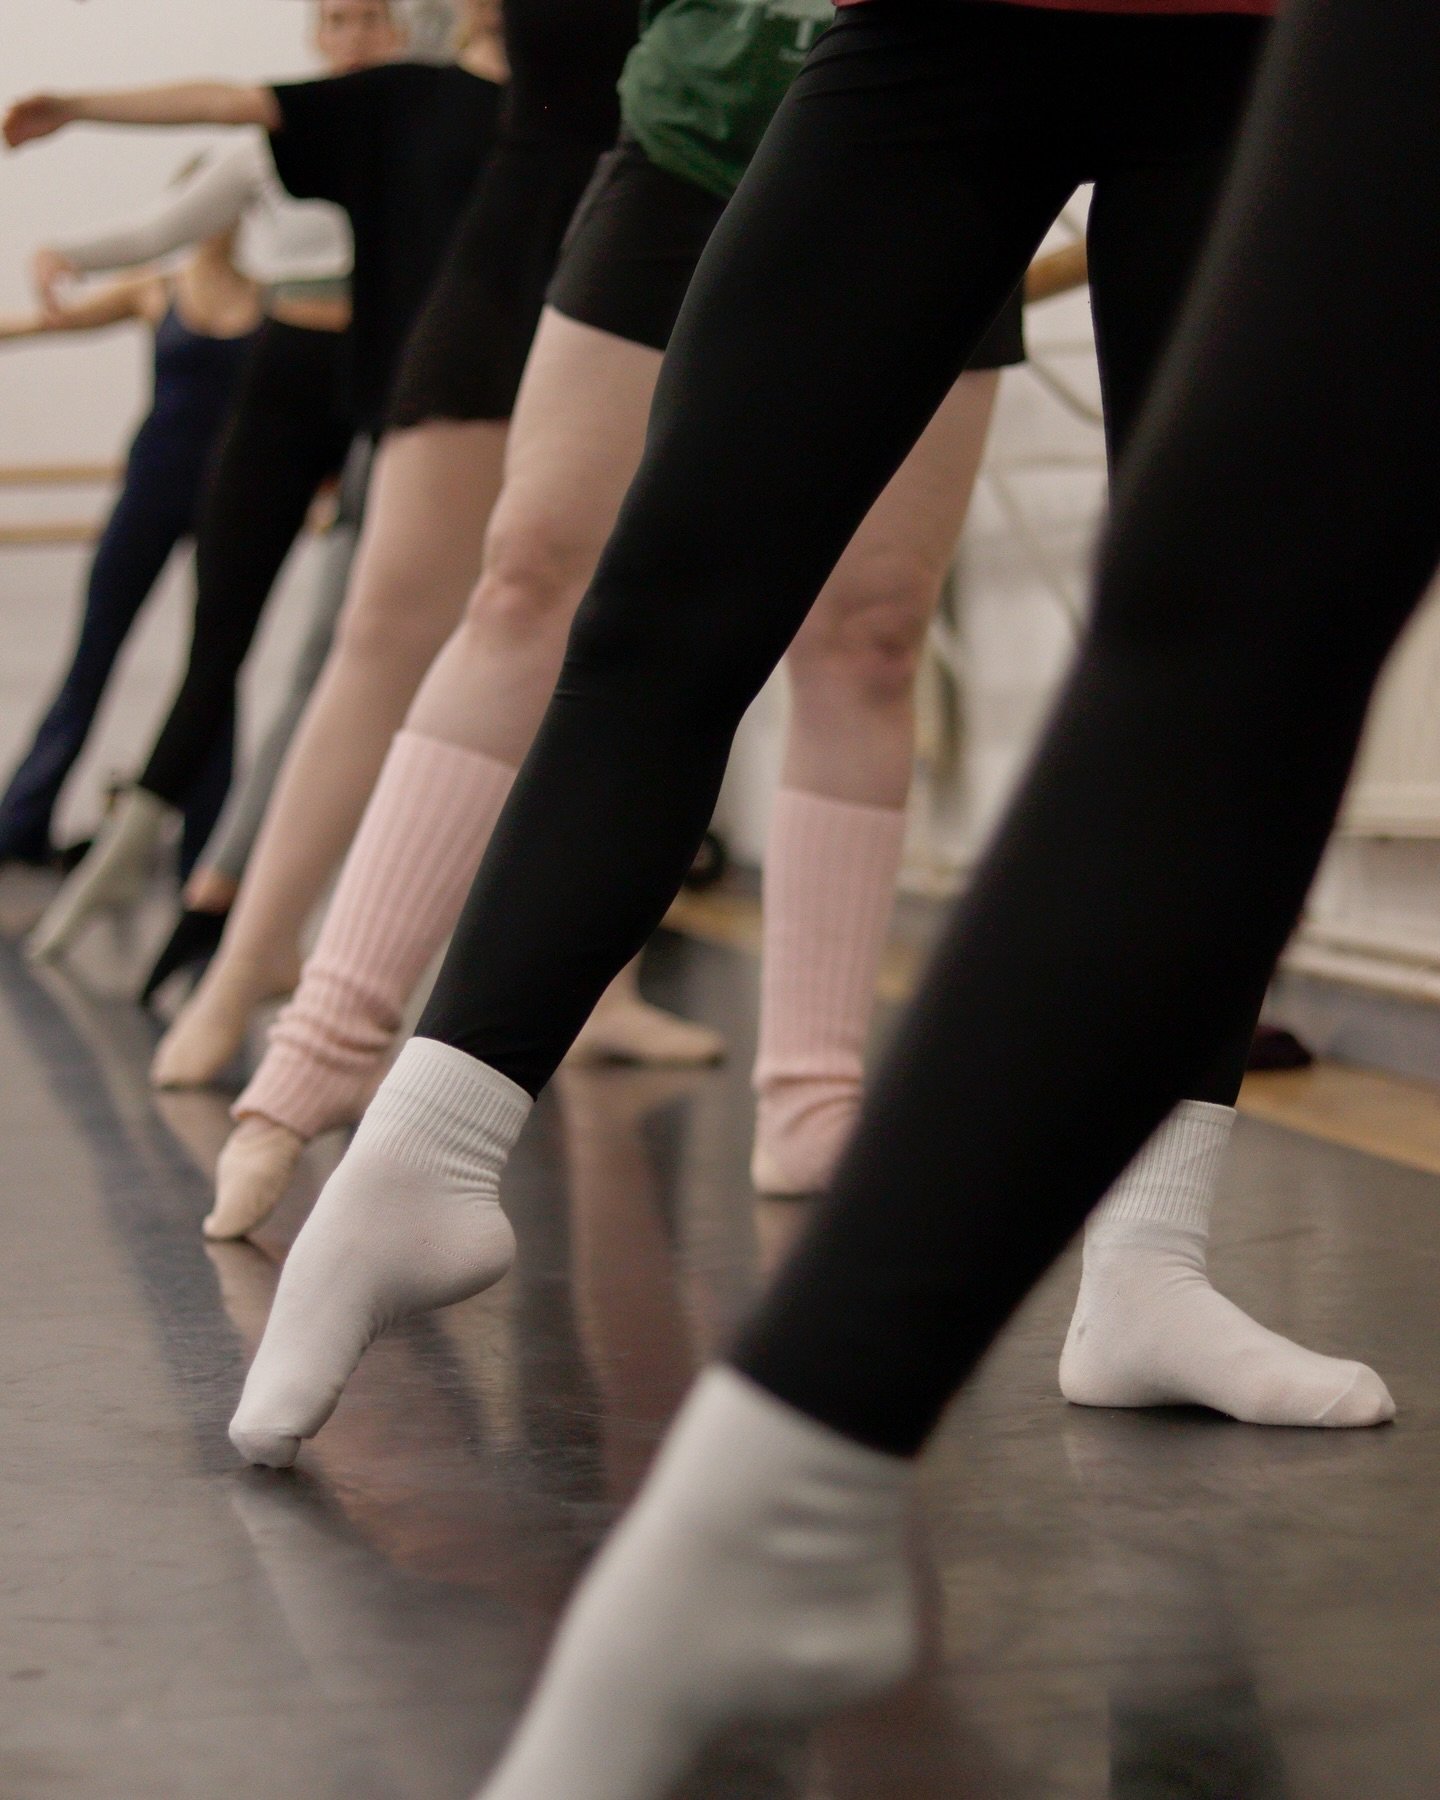 Our Pre-Pointe and Pointe class runs every Friday online. 1-2pm via Zoom with @dance.withjuli 

You can join live or access the recording. Book a drop-in via the link in our bio :)

📸 of our Beginner students by @emilydurhamphotography 💕